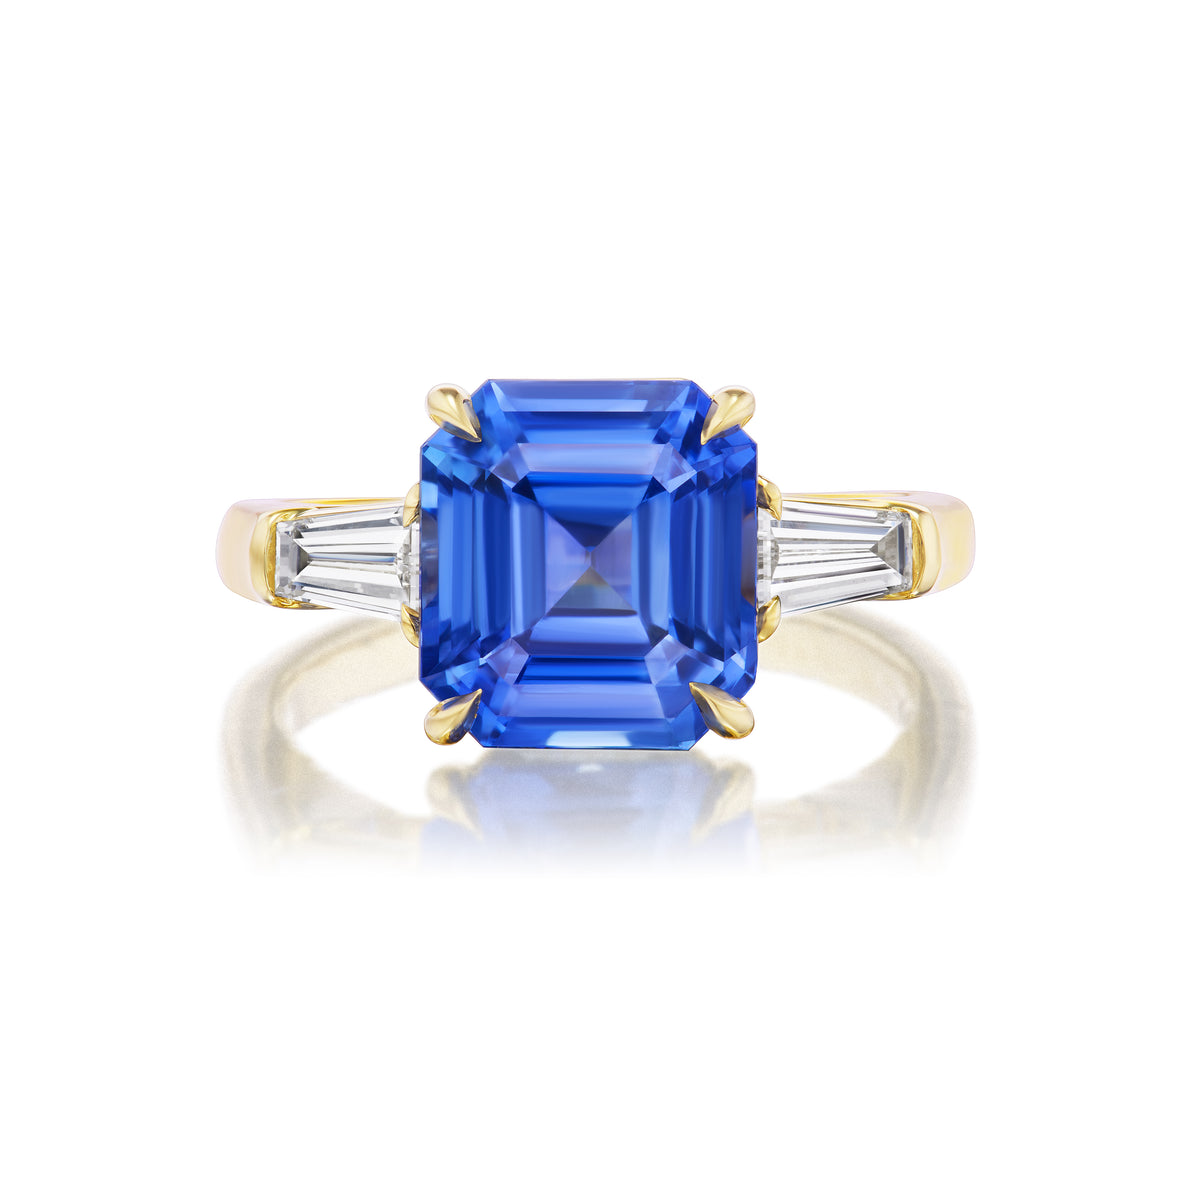 Asscher Cut Sapphire Engagement Ring with Tapered Baguette Diamond Side Stones